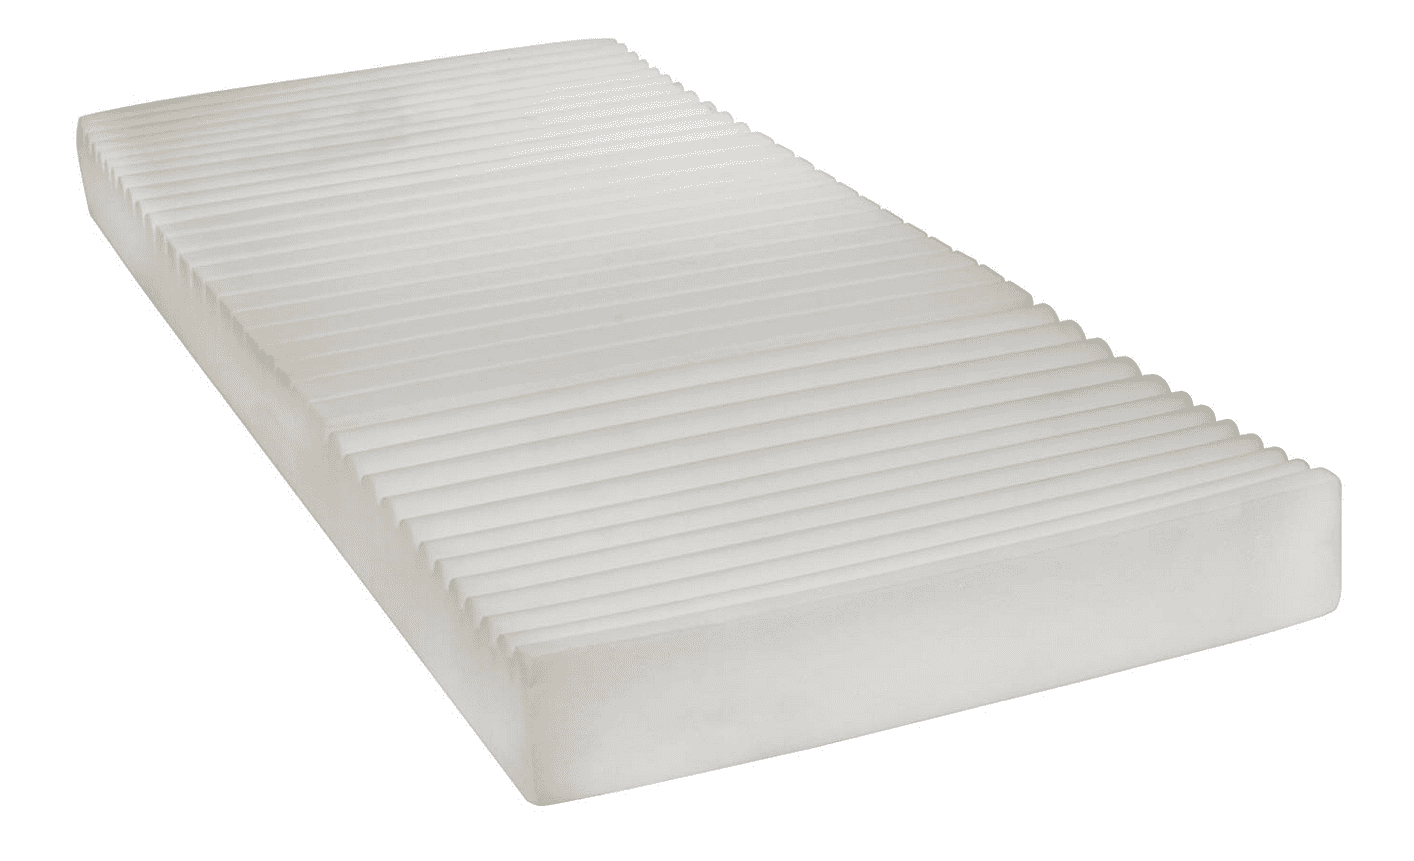 therapeutic mattress pad that stays cool